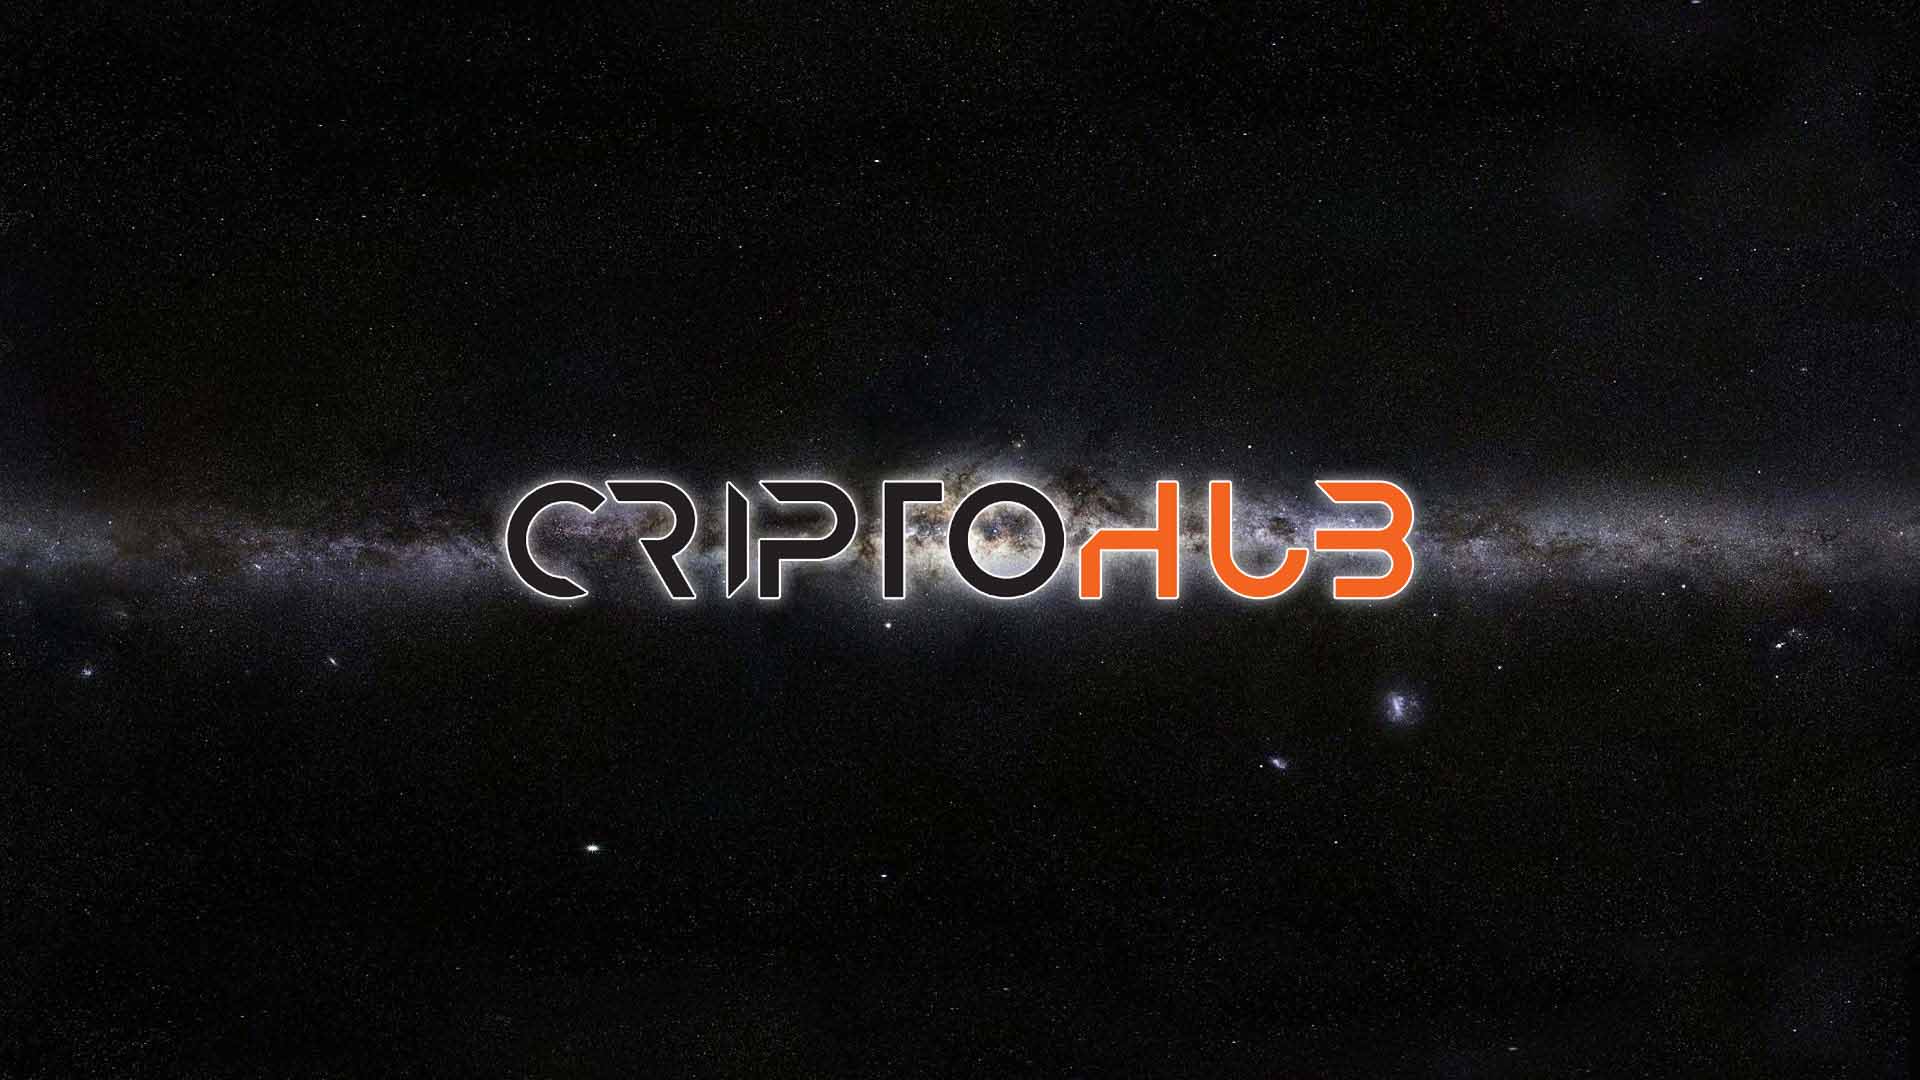 CriptoHub Launches Highly Anticipated ICO Backed By Trusted Cryptocurrency Exchange Based In Brazil